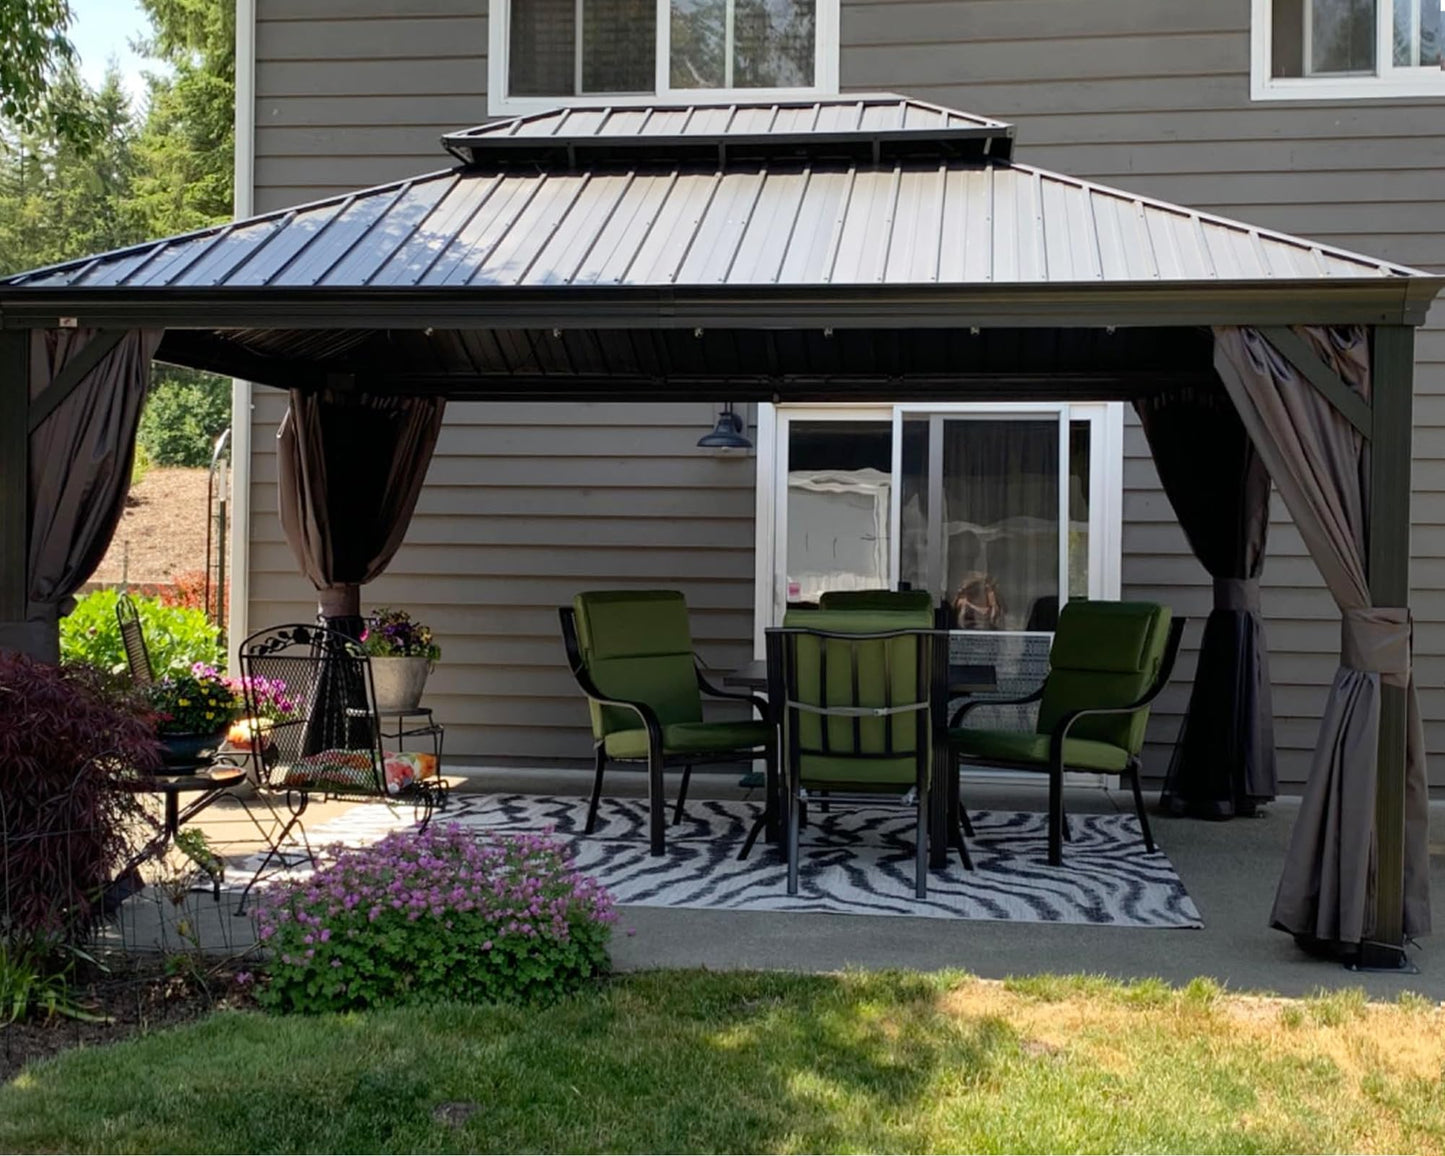 PURPLE LEAF 12' X 16' Permanent Hardtop Gazebo Aluminum Gazebo with Galvanized Steel Double Roof for Patio Lawn and Garden, Curtains and Netting Included, Grey